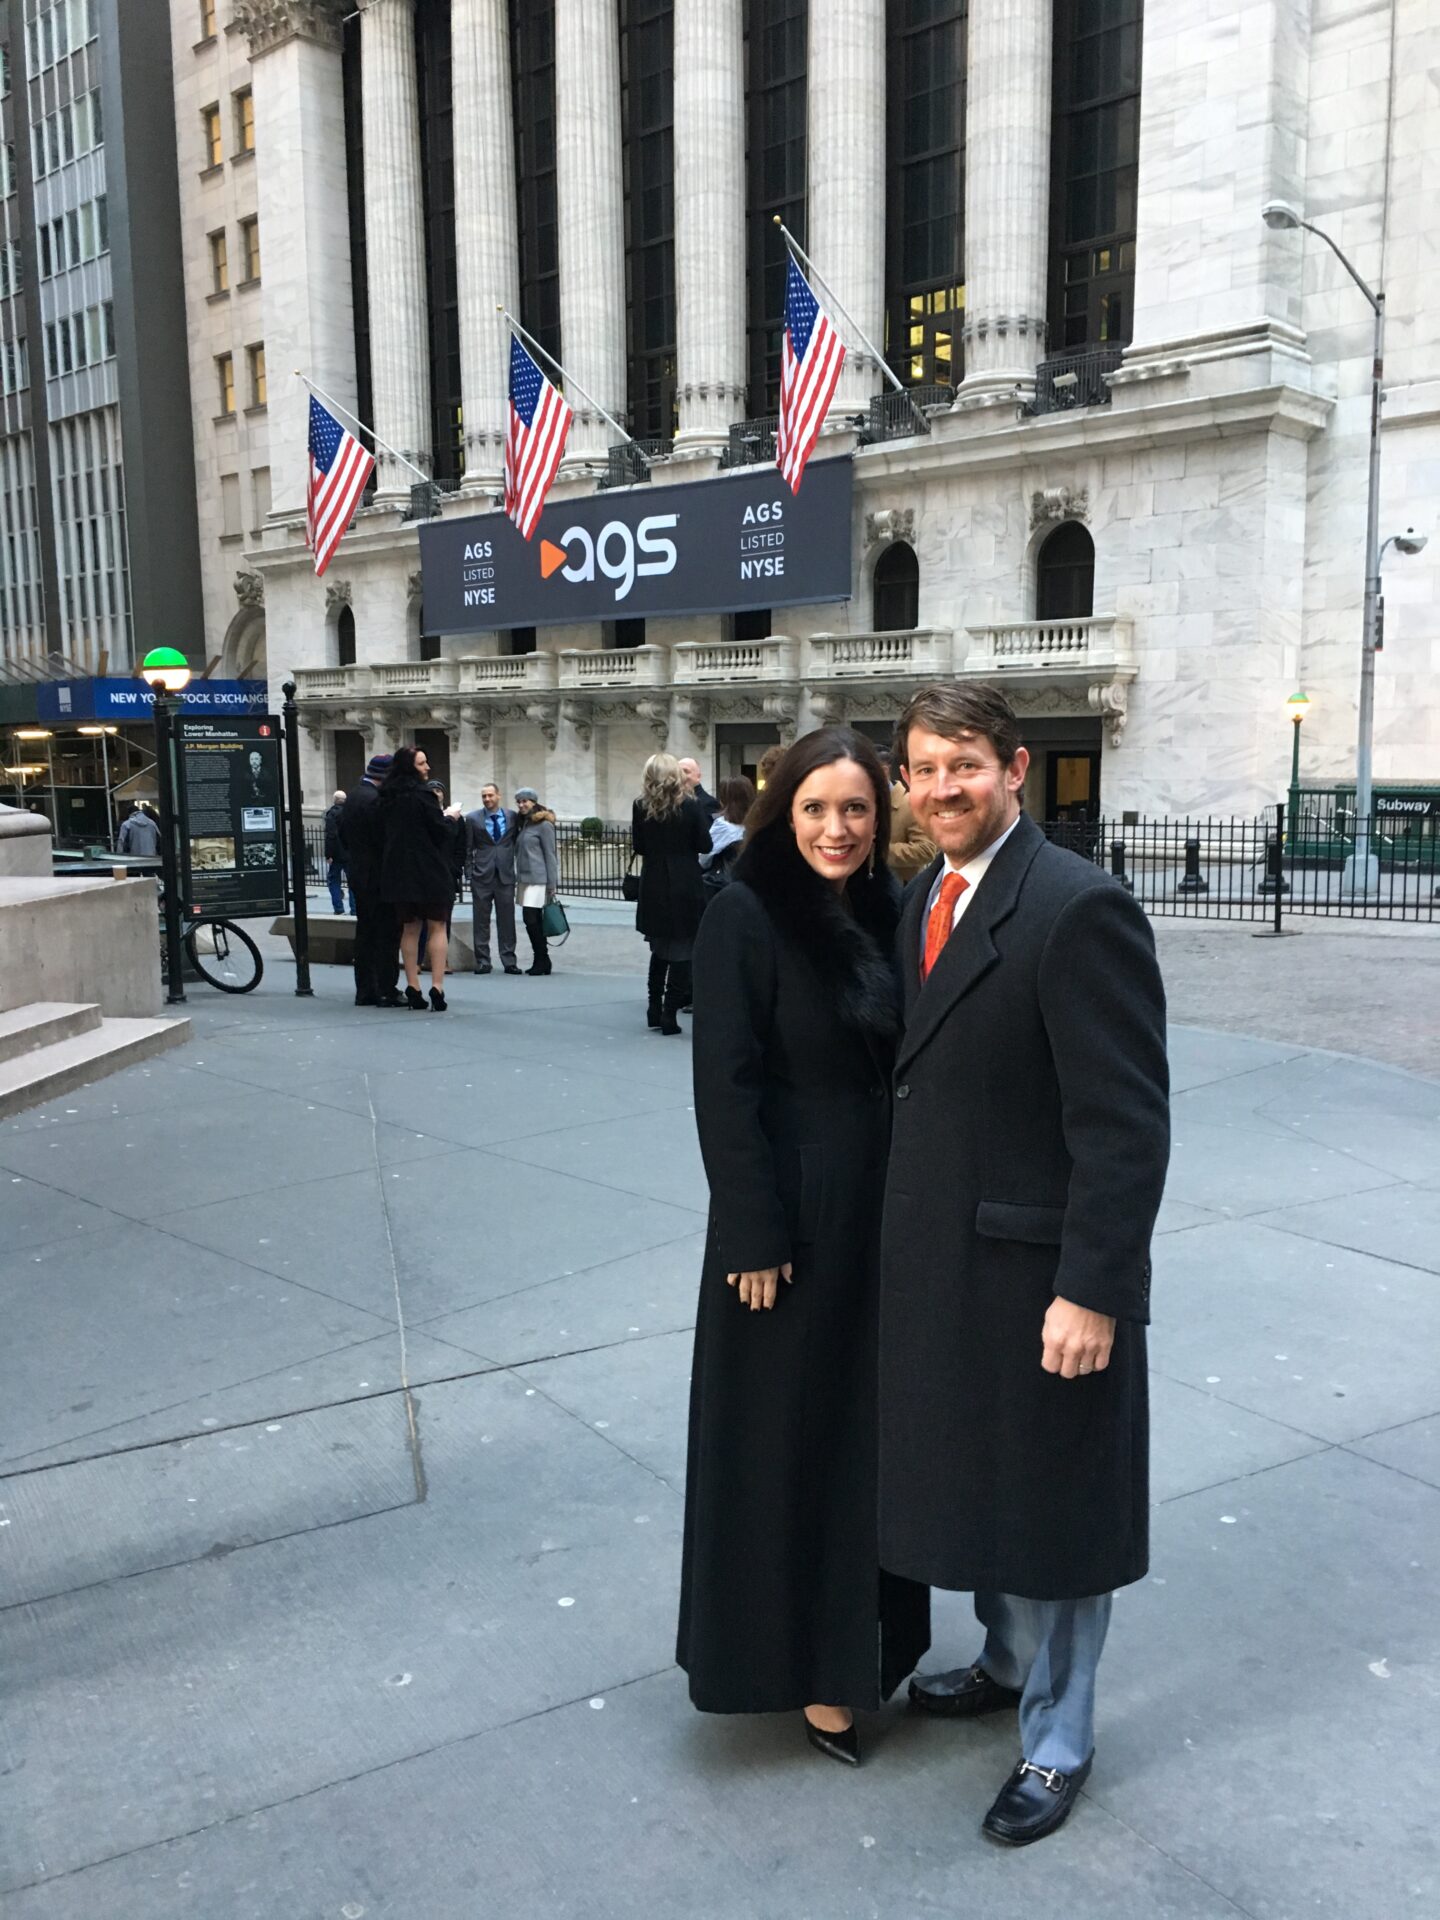 Former Mr. Ole Miss Robert Perry Opens Up the New York Stock